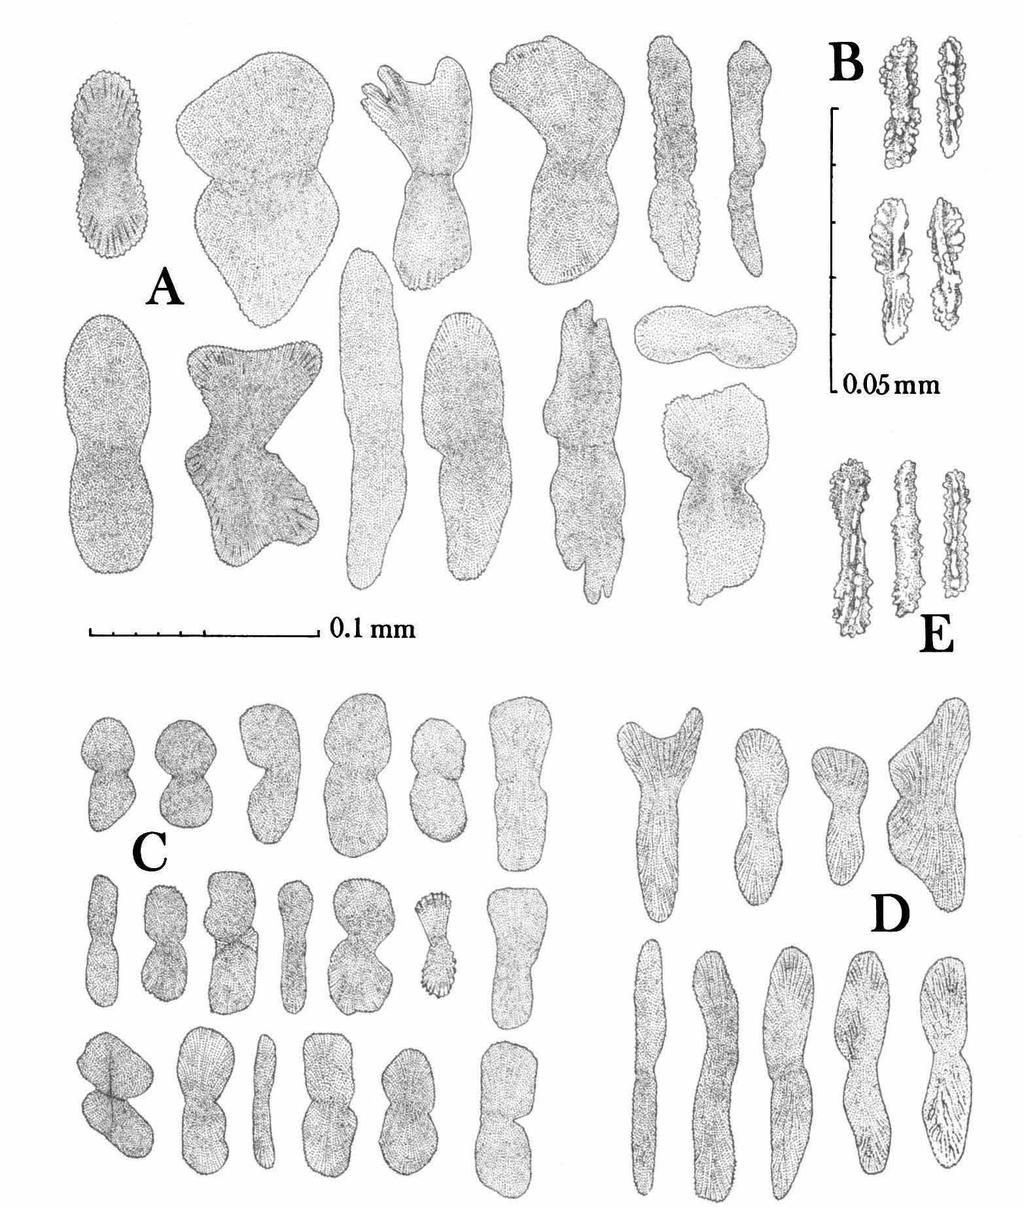 72 ZOOLOGISCHE MEDEDELINGEN 50 (1976) Fig. 2, A, sclerites from body of polyp of Stephanogorgia wainwrighti spec. nov. ; B, sclerites from tentacles of S.